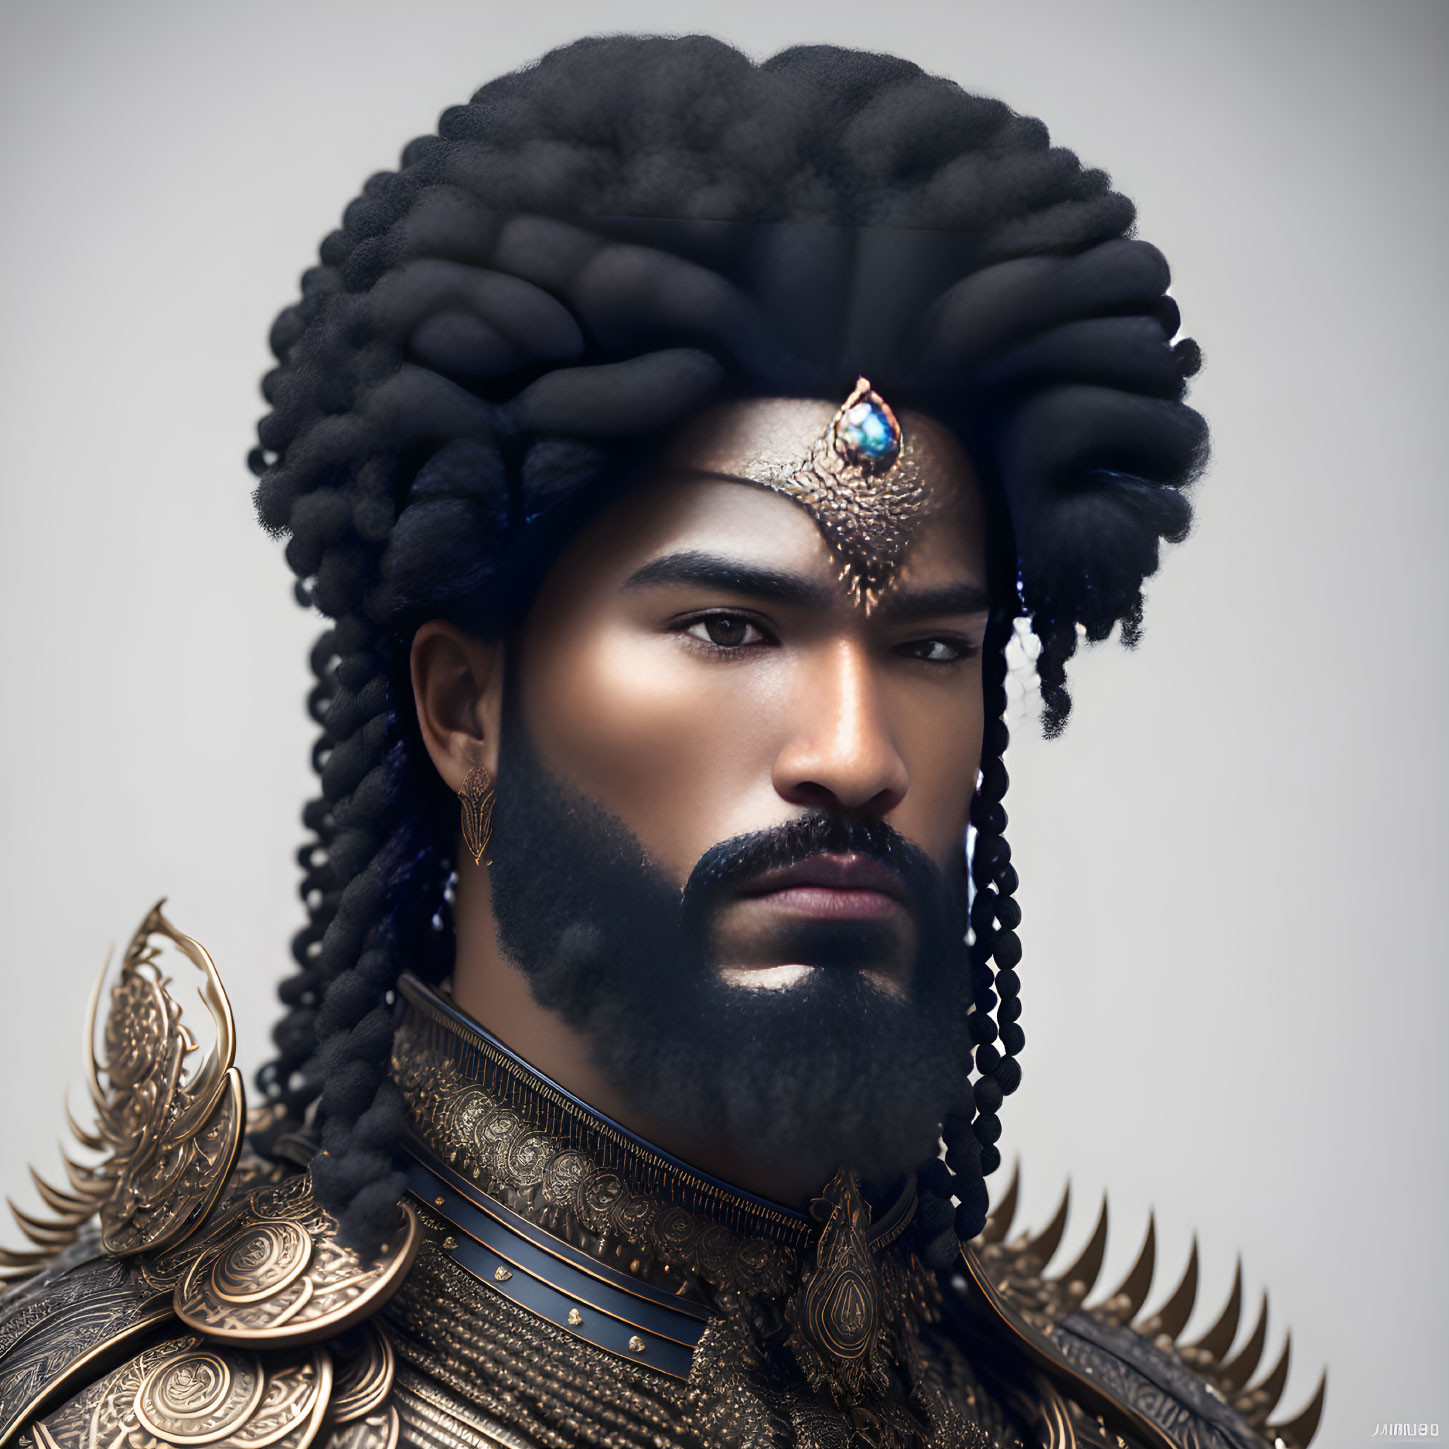 Regal man portrait with golden armor and blue gemstone